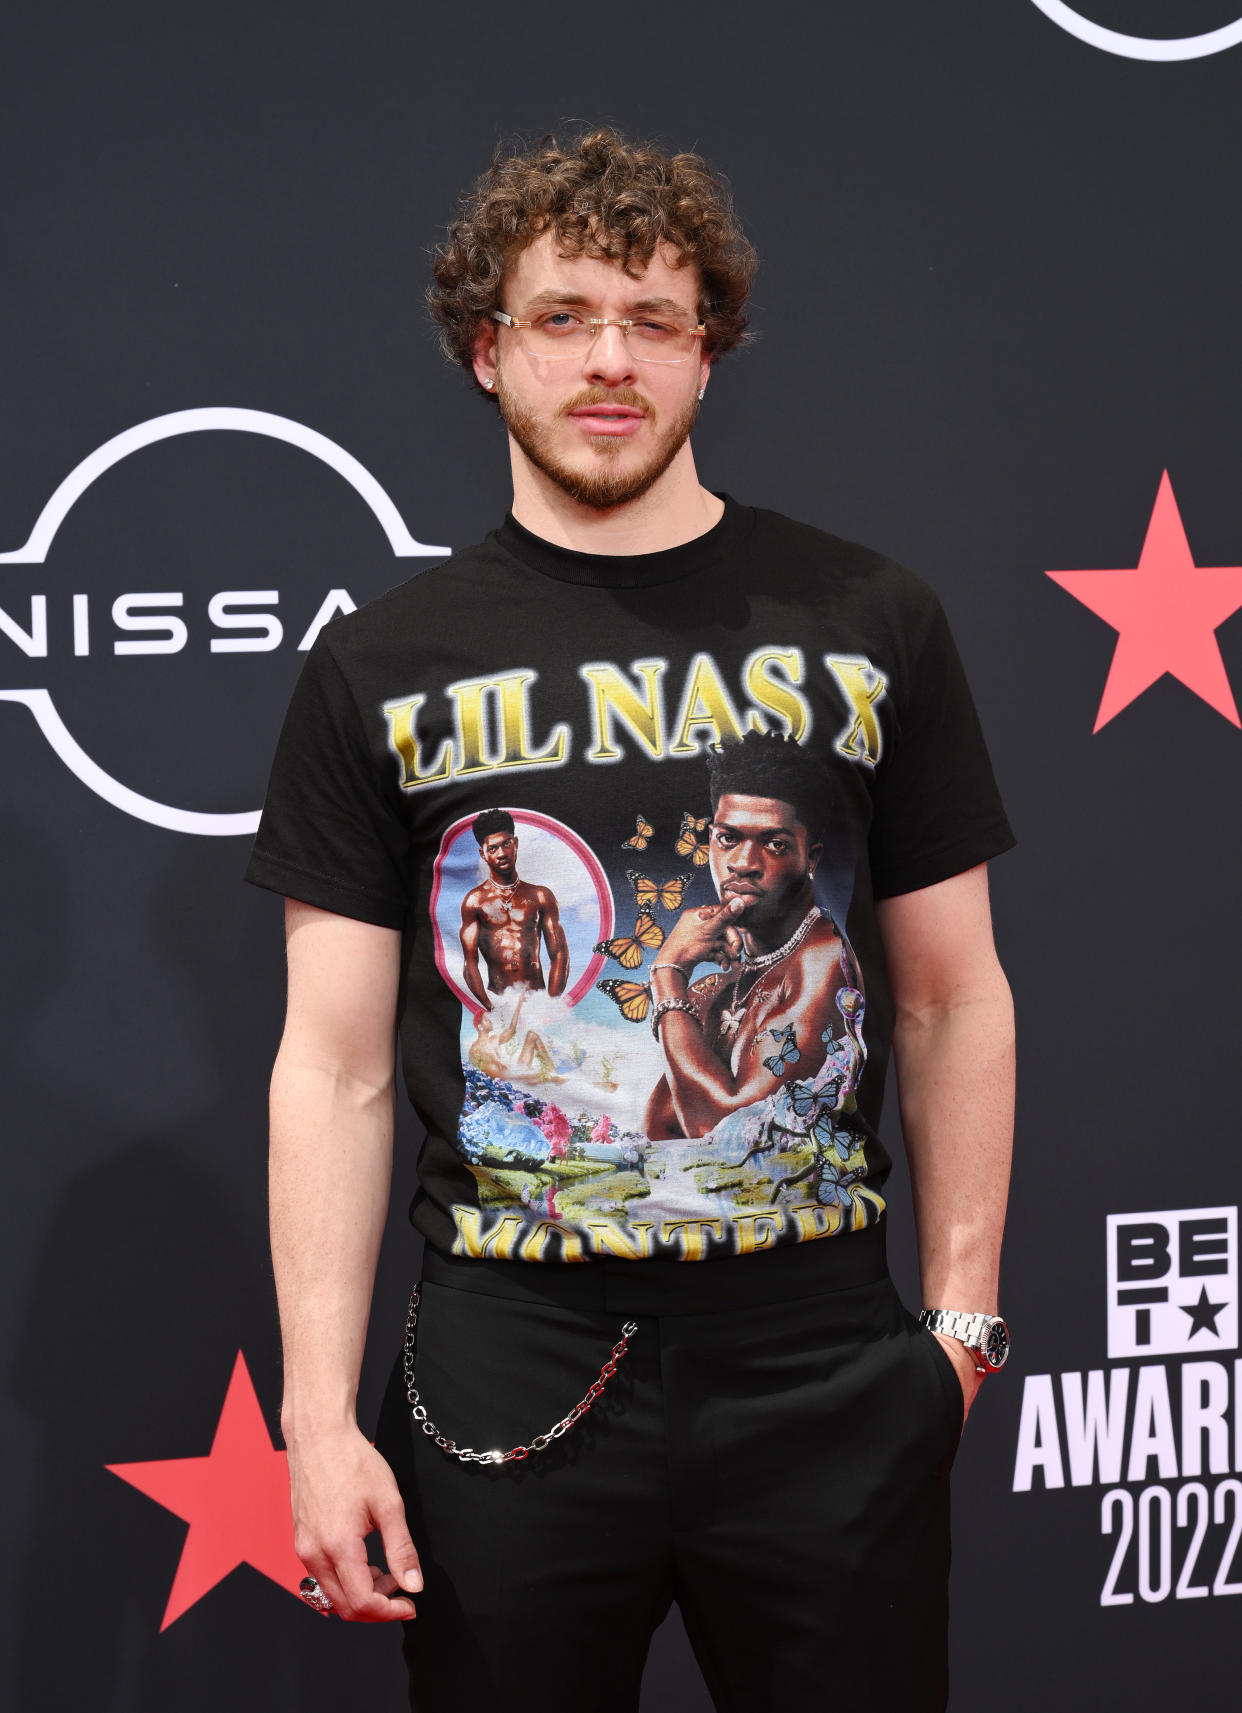 Jack Harlow at the 2022 BET Awards held at the,Microsoft Theater on June 26, 2022 in Los Angeles, California. - Credit: Michael Buckner/Variety